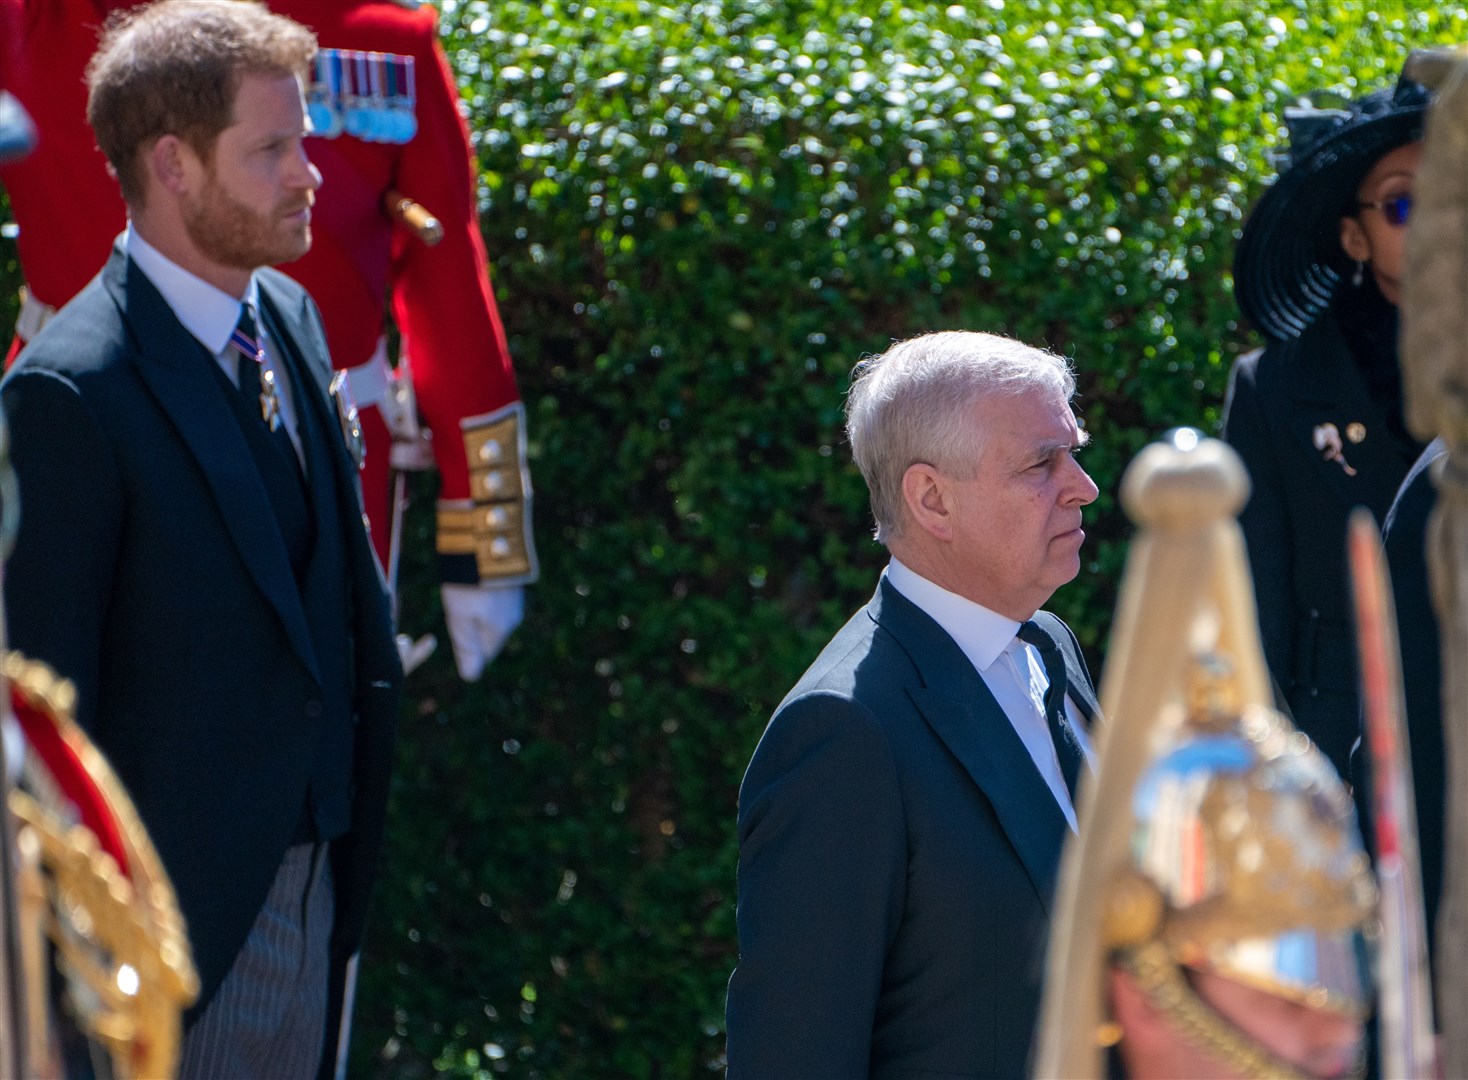 The Duke of Sussex and his uncle the Duke of York at Philip’s funeral in 2021 (Arthur Edwards/The Sun/PA)